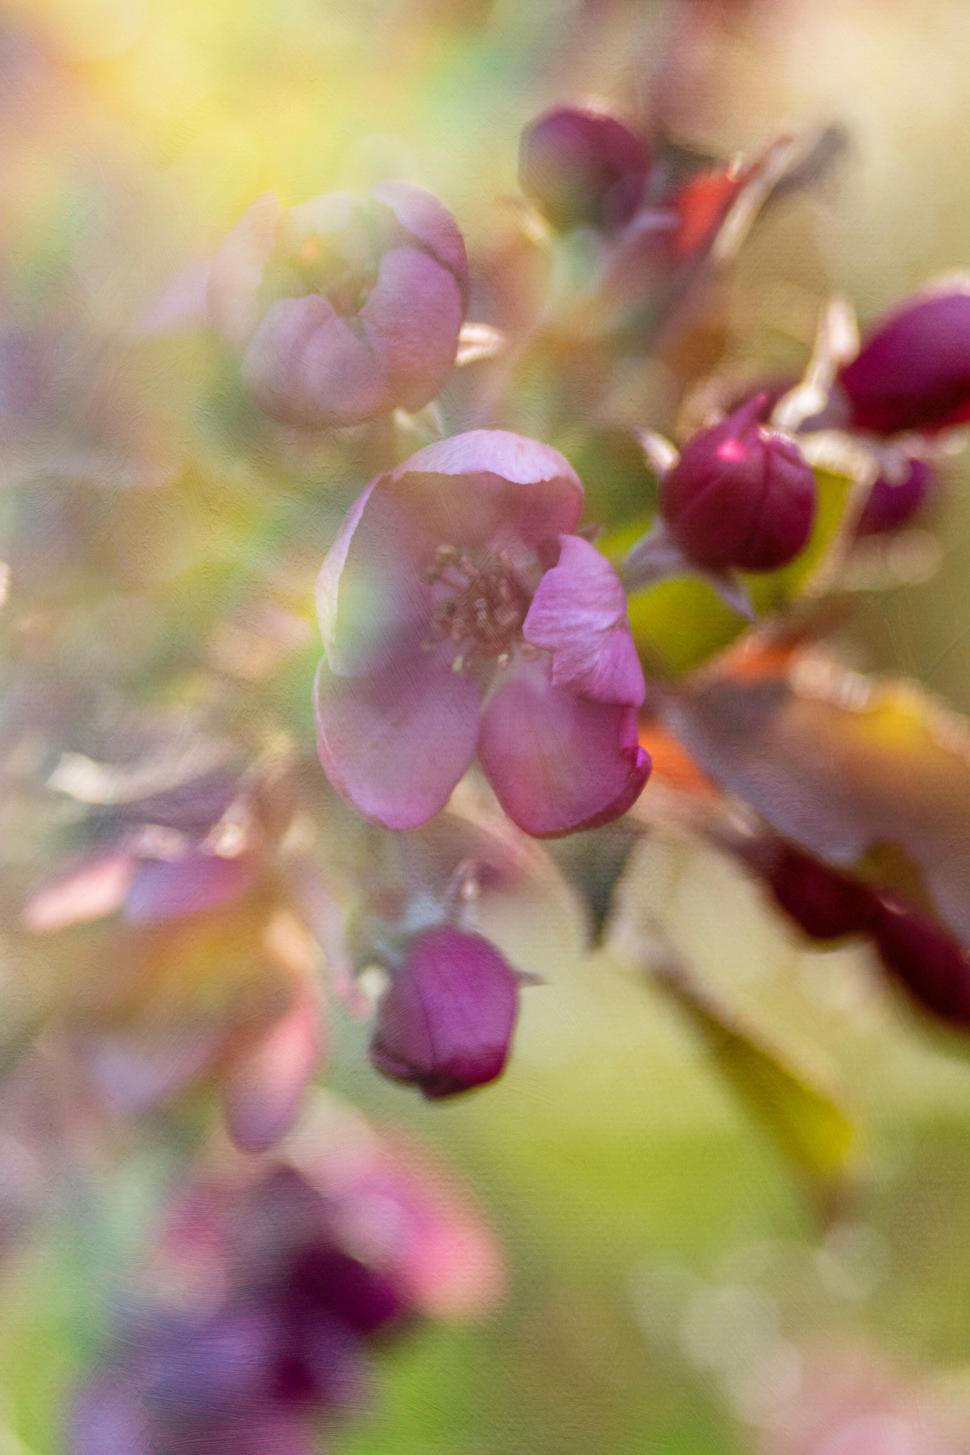 Free Image of Soft Pink Blooms in Golden Sunlight Dappled Light 